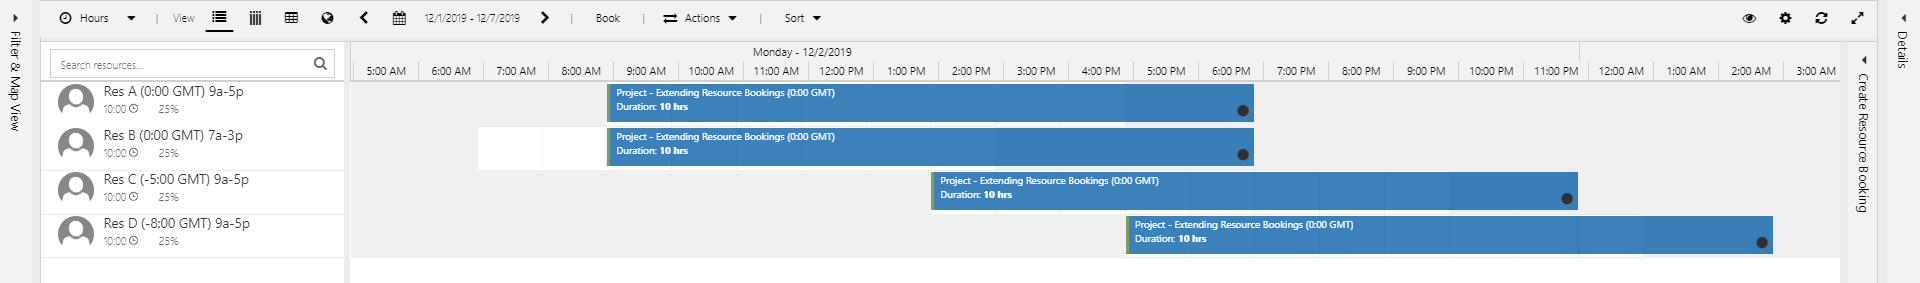 New bookings of the resources in the schedule board.